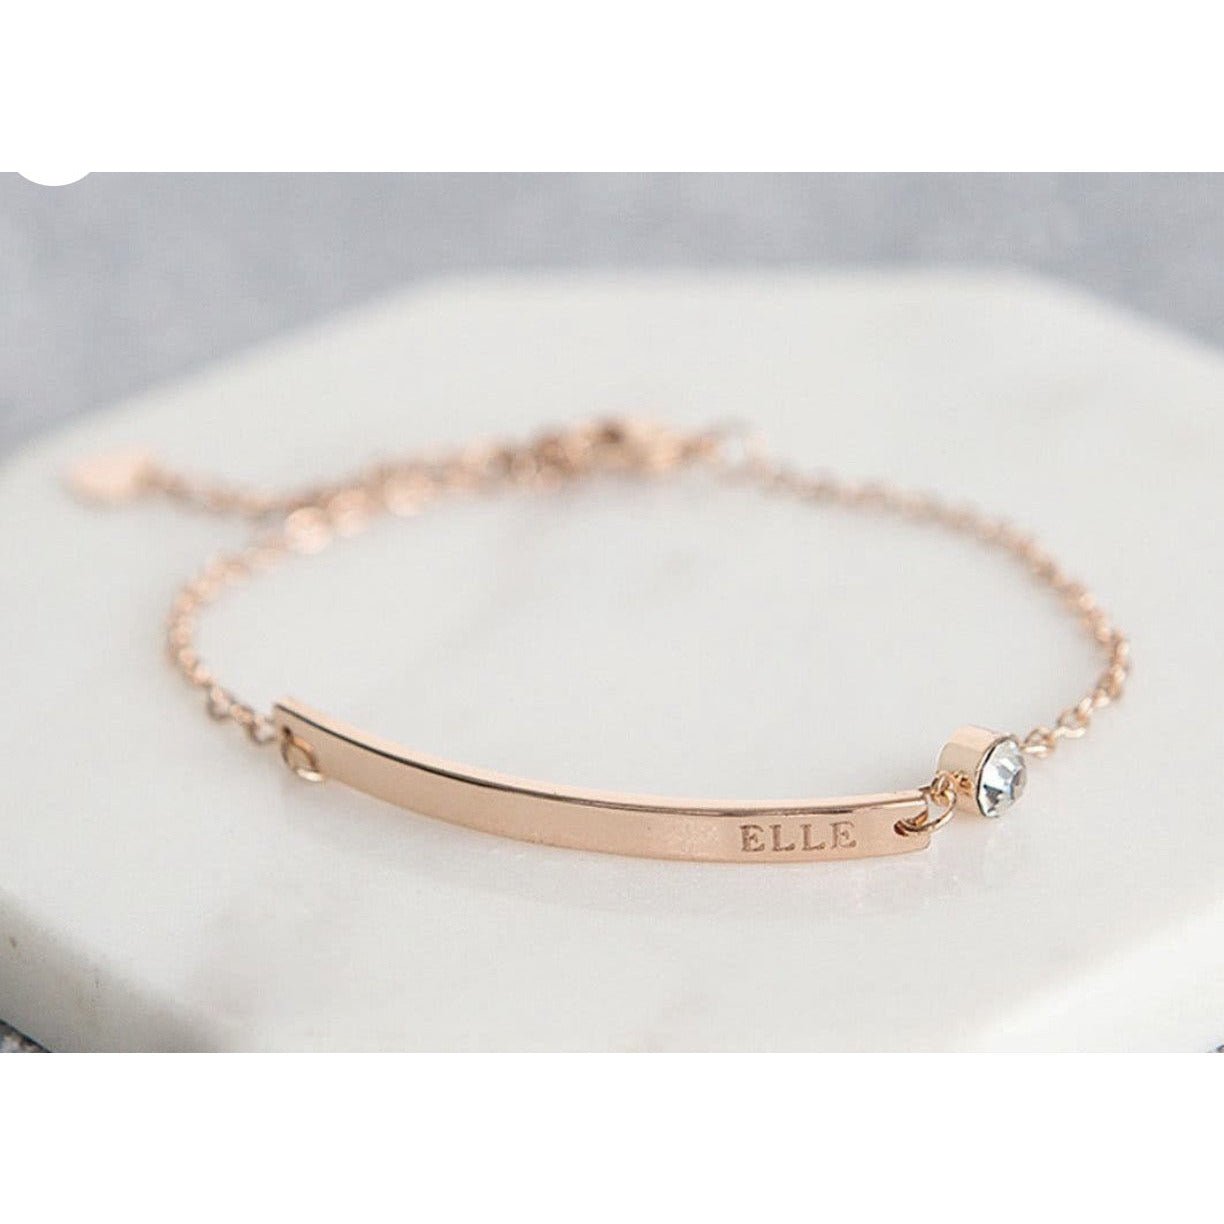 Personalised Love The Earth Bar Bracelet  Posh Totty Designs